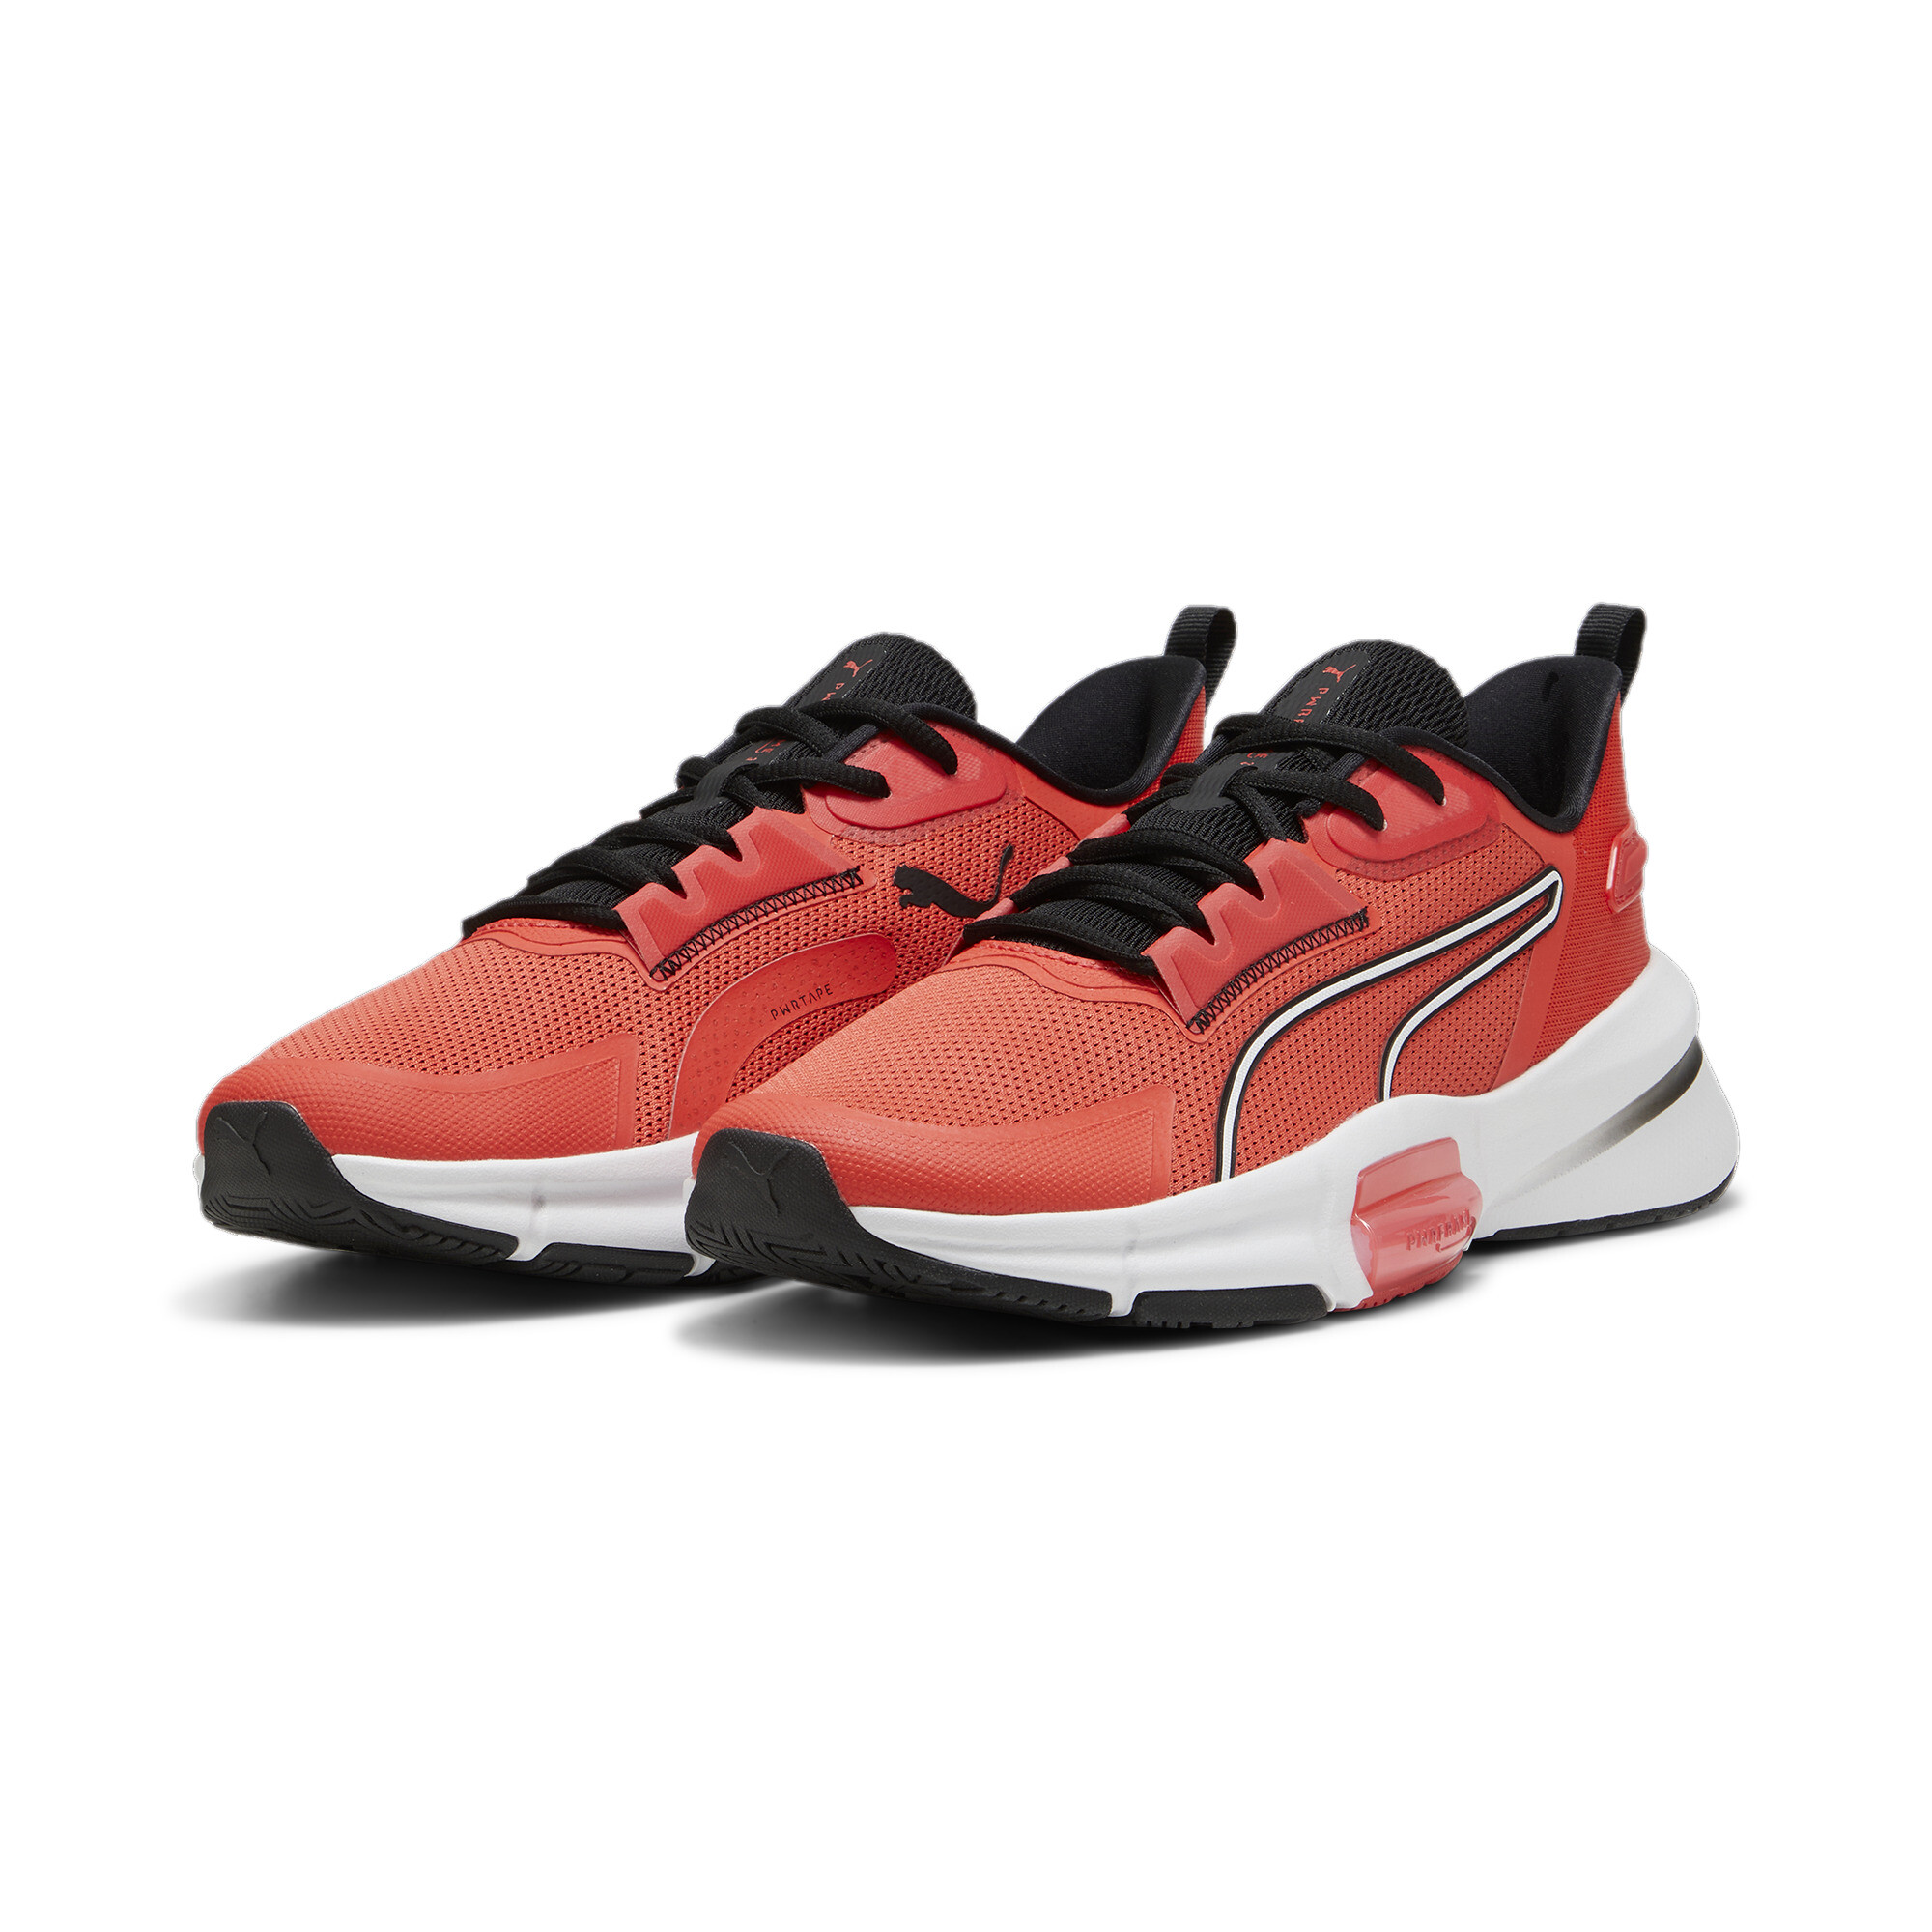 Men's PUMA PWRFrame TR 3 Training Shoes In Red, Size EU 43